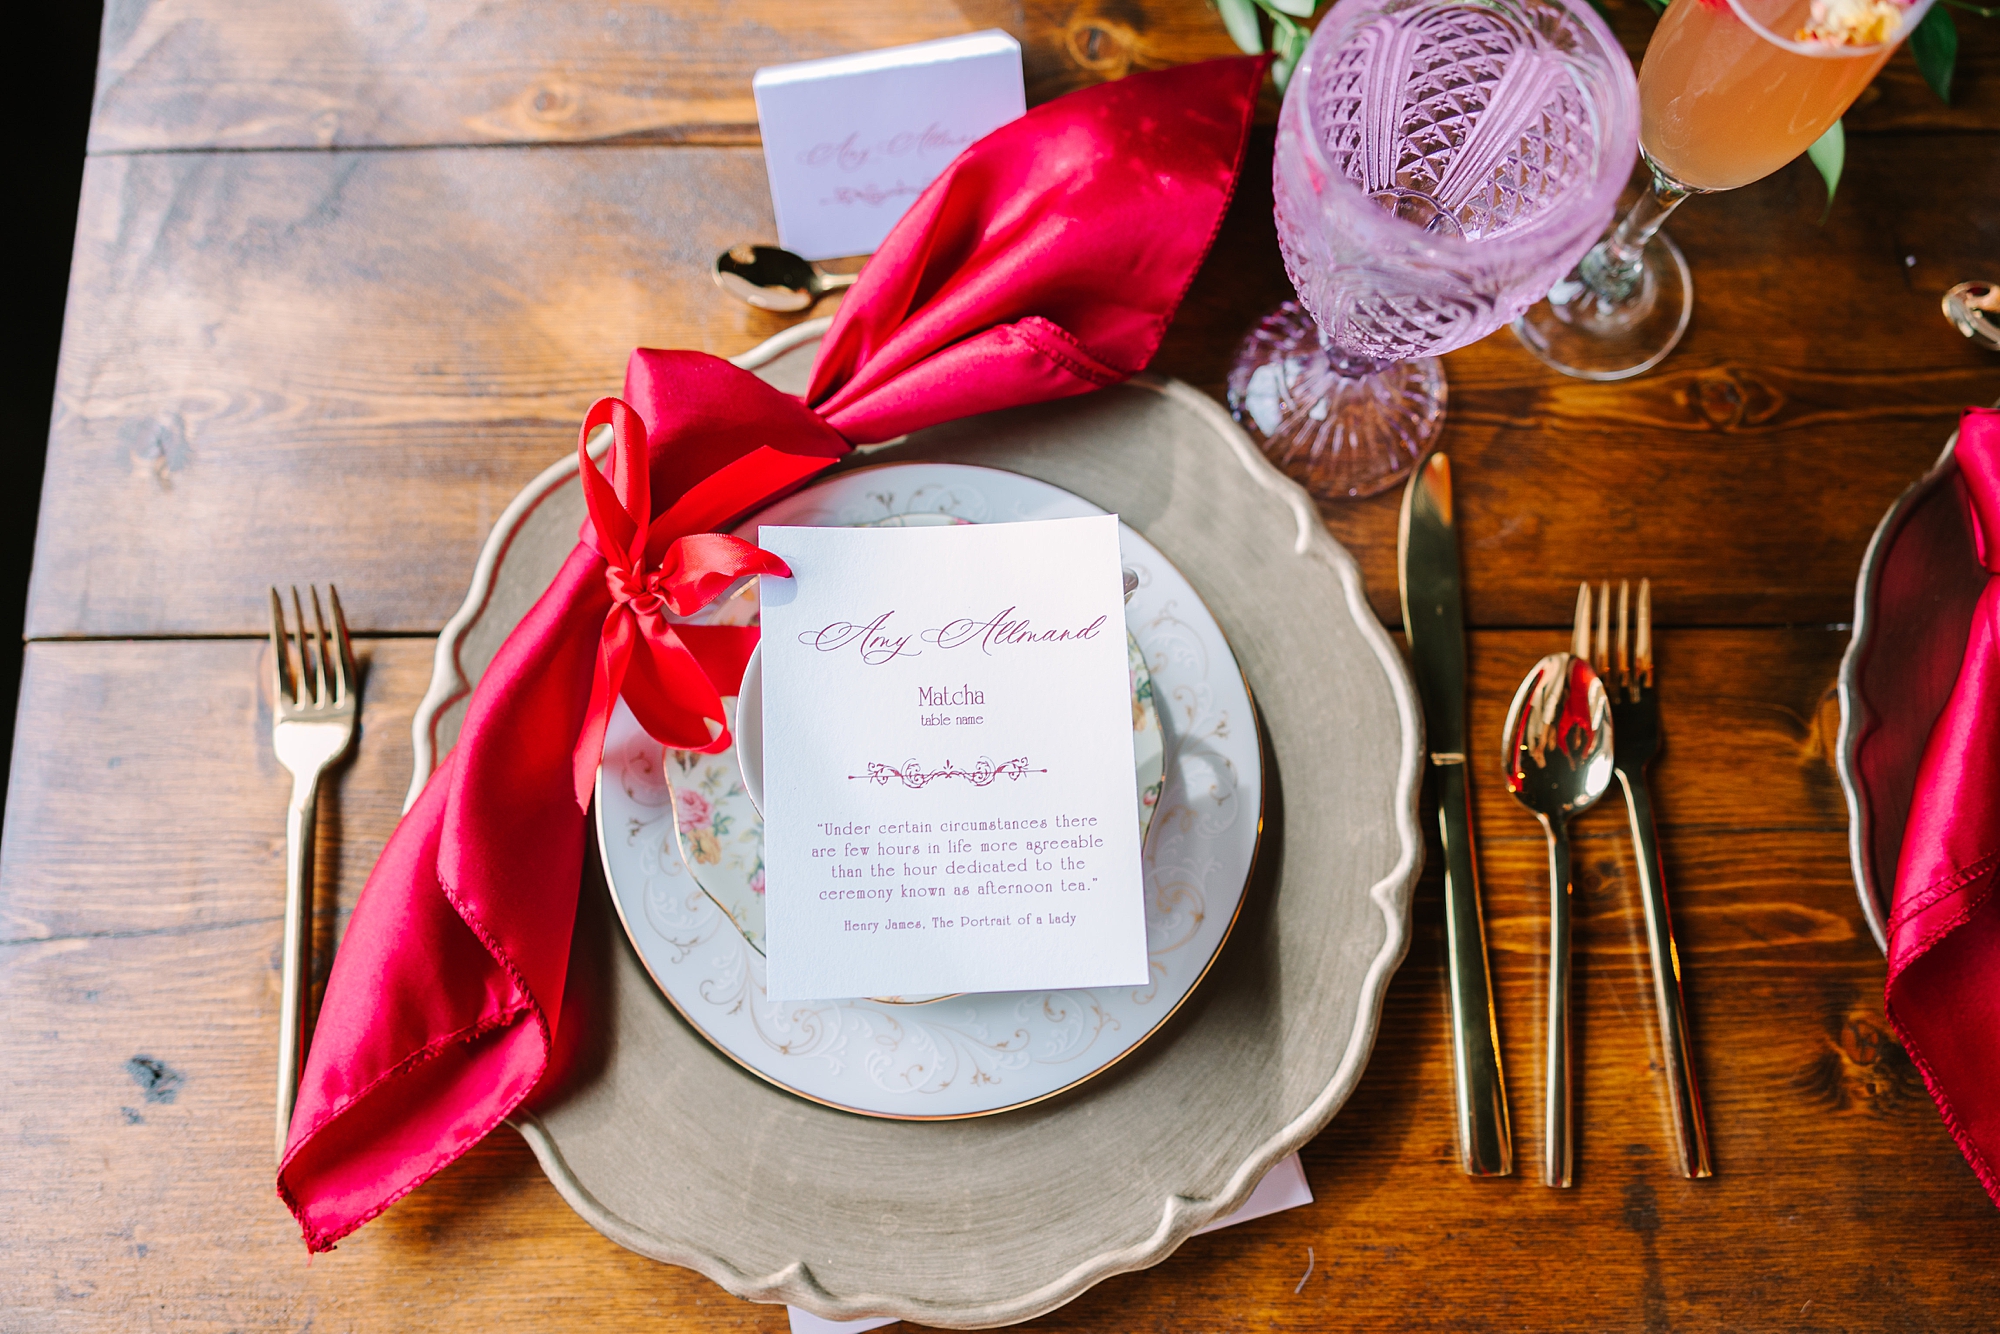 place setting with vintage plates and red napkin for Galentine's Day Tea Party